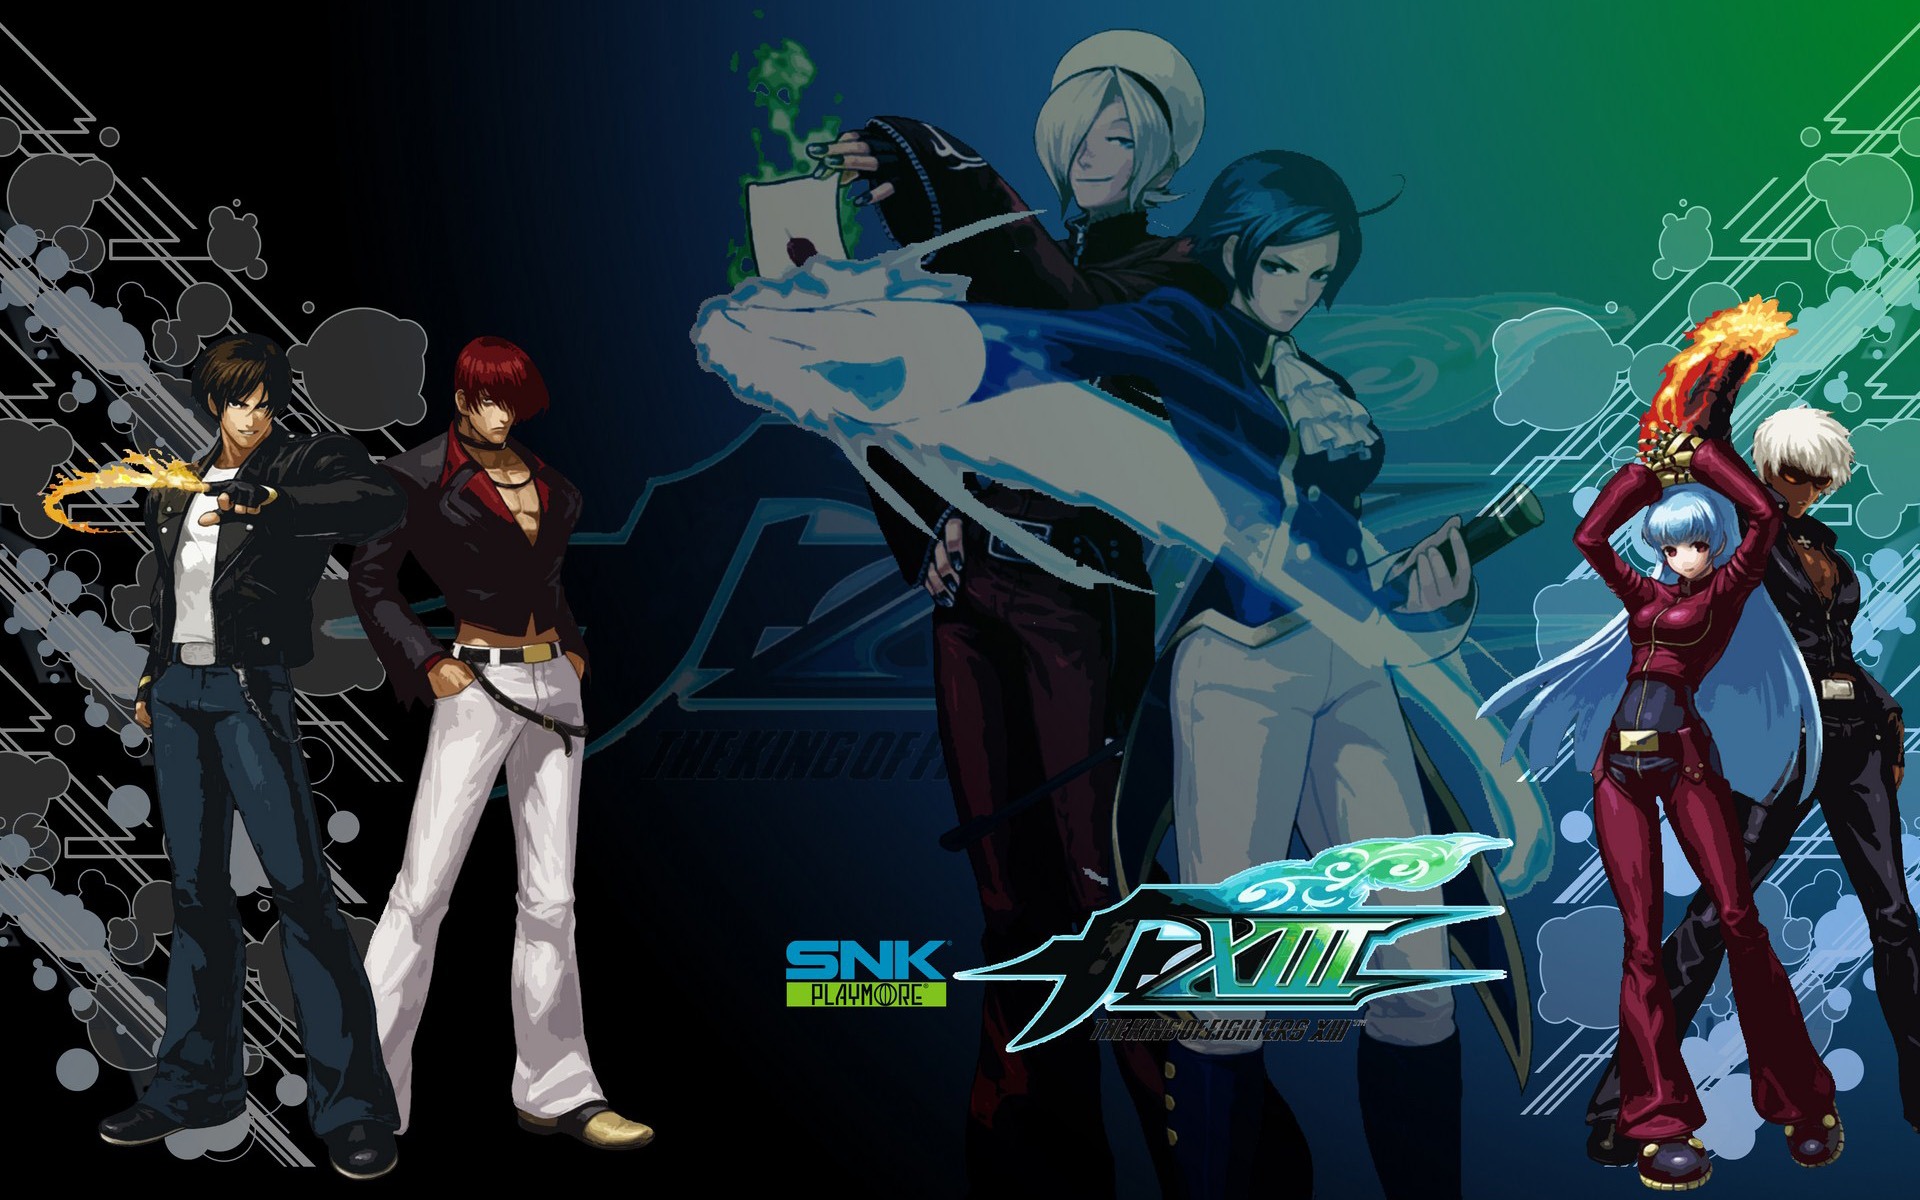 Le roi de wallpapers Fighters XIII #4 - 1920x1200